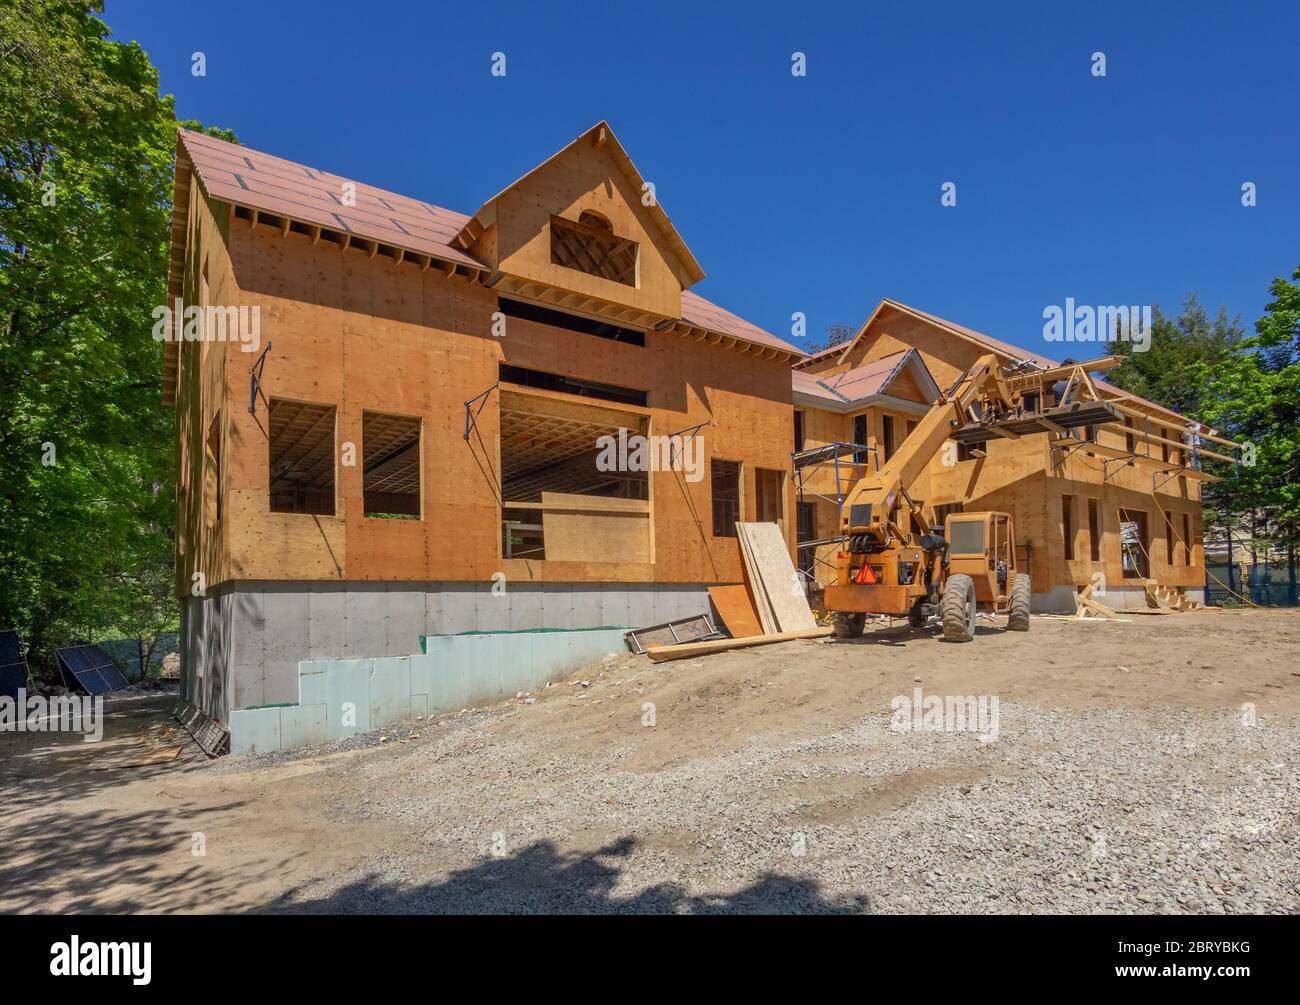 New house construction site in the suburbs Stock Photo